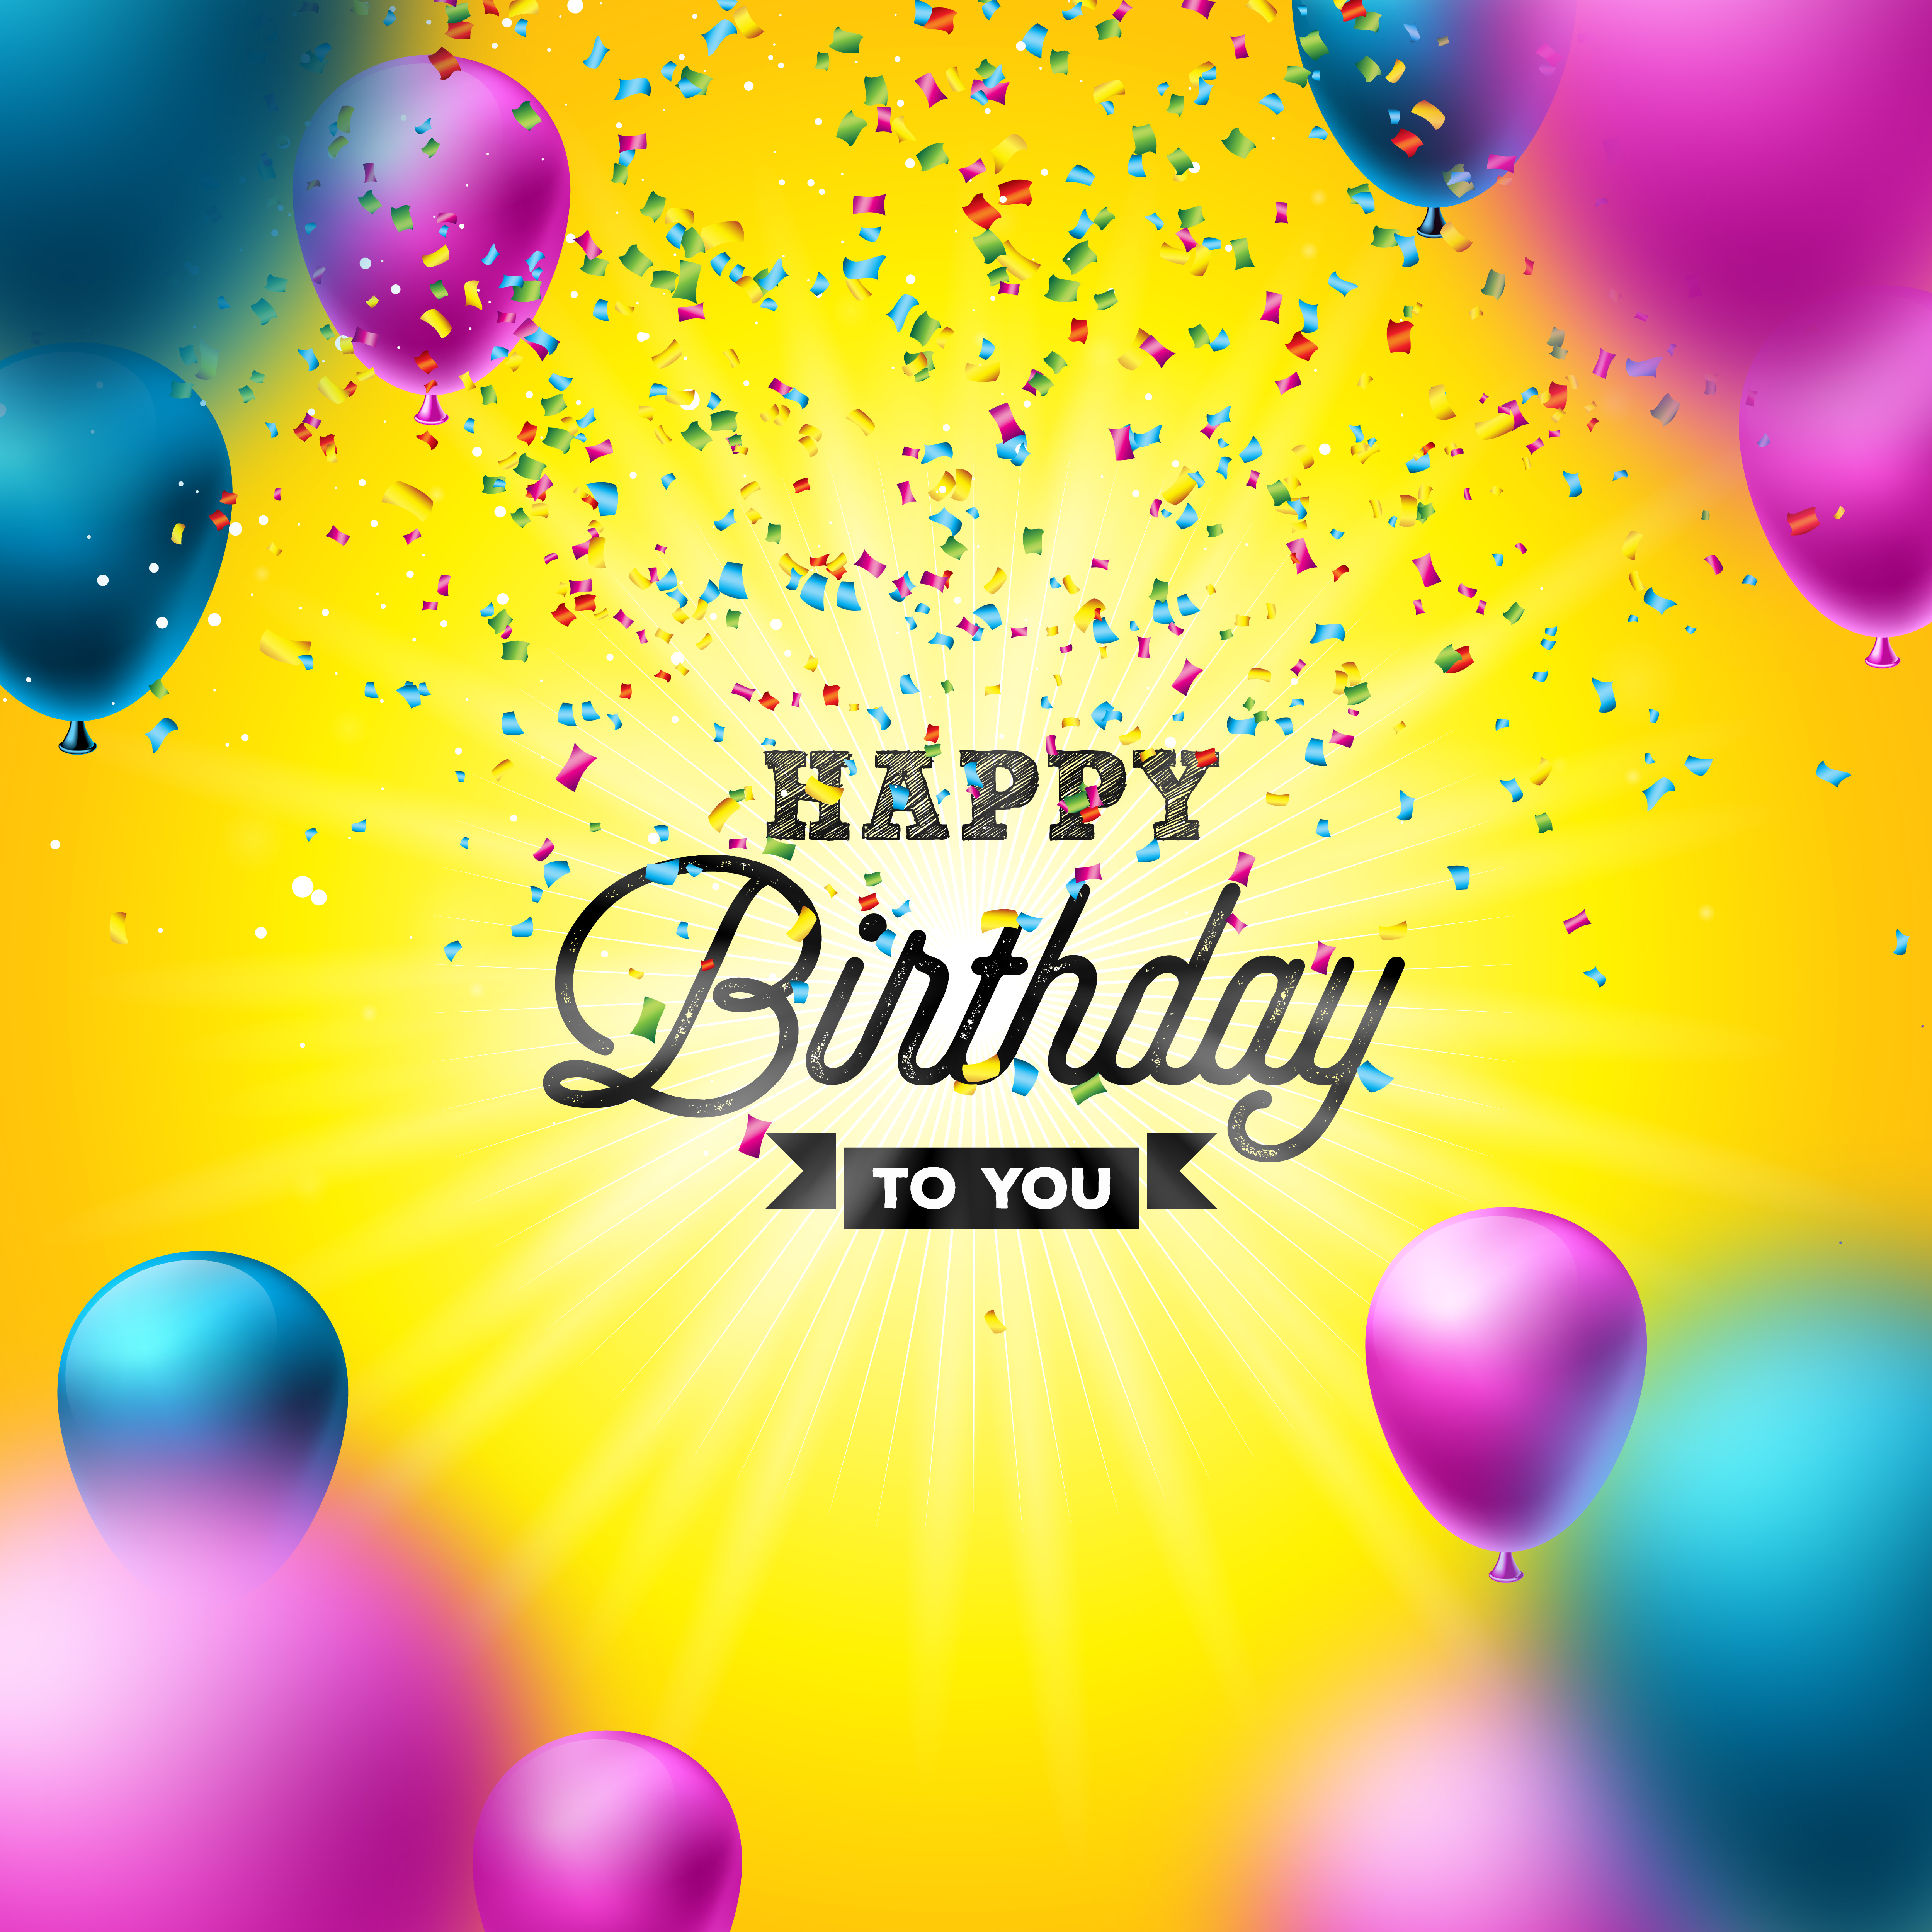 Happy Birthday Vector Design with Balloon, Typography and Falling Confetti on Shiny Yellow